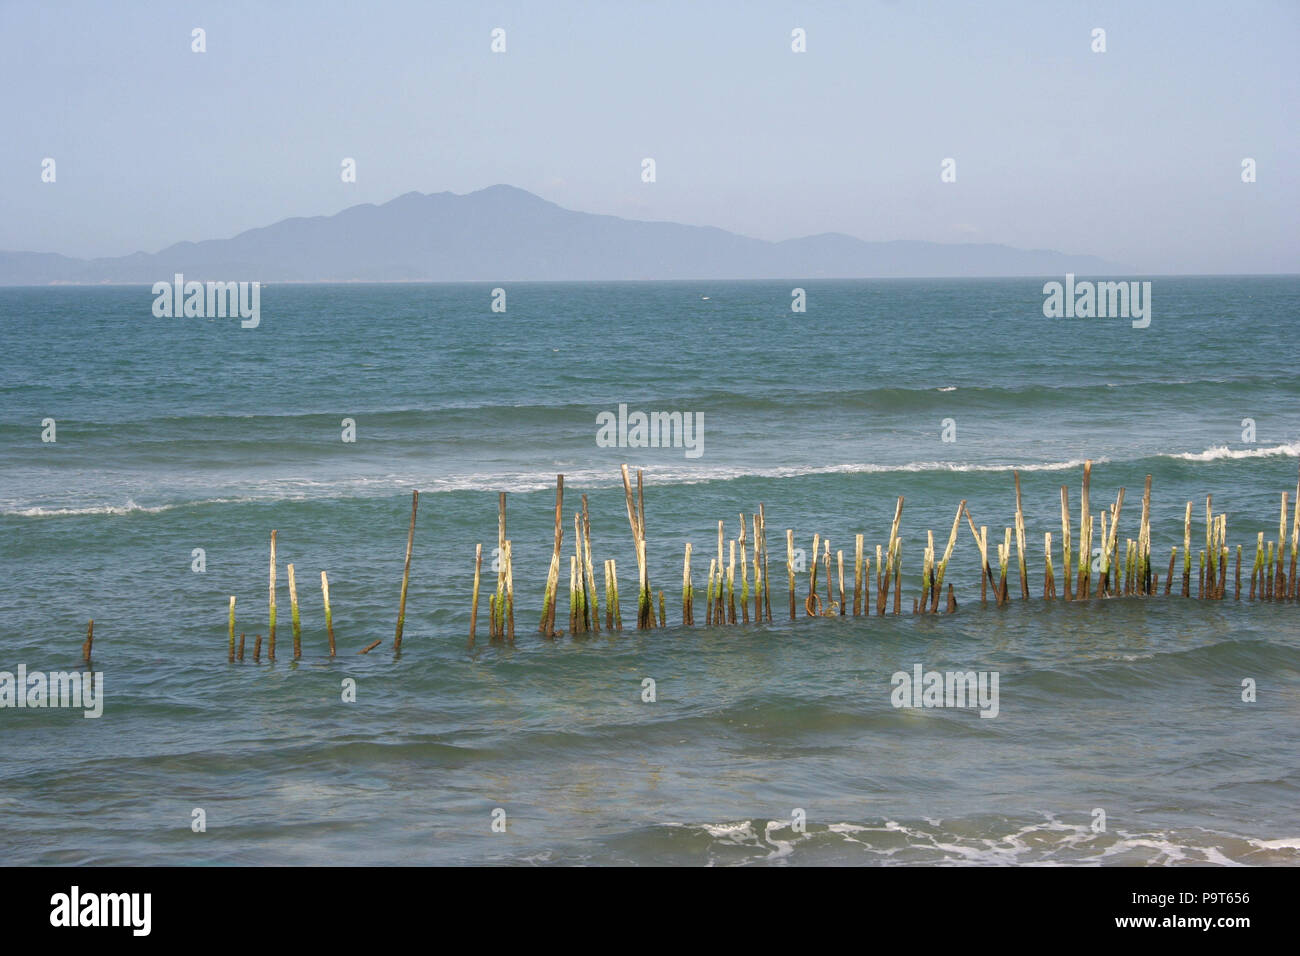 Row of Sticks in Sea with Hills in the Background on Vietnamese East Coast, Vietnam Stock Photo